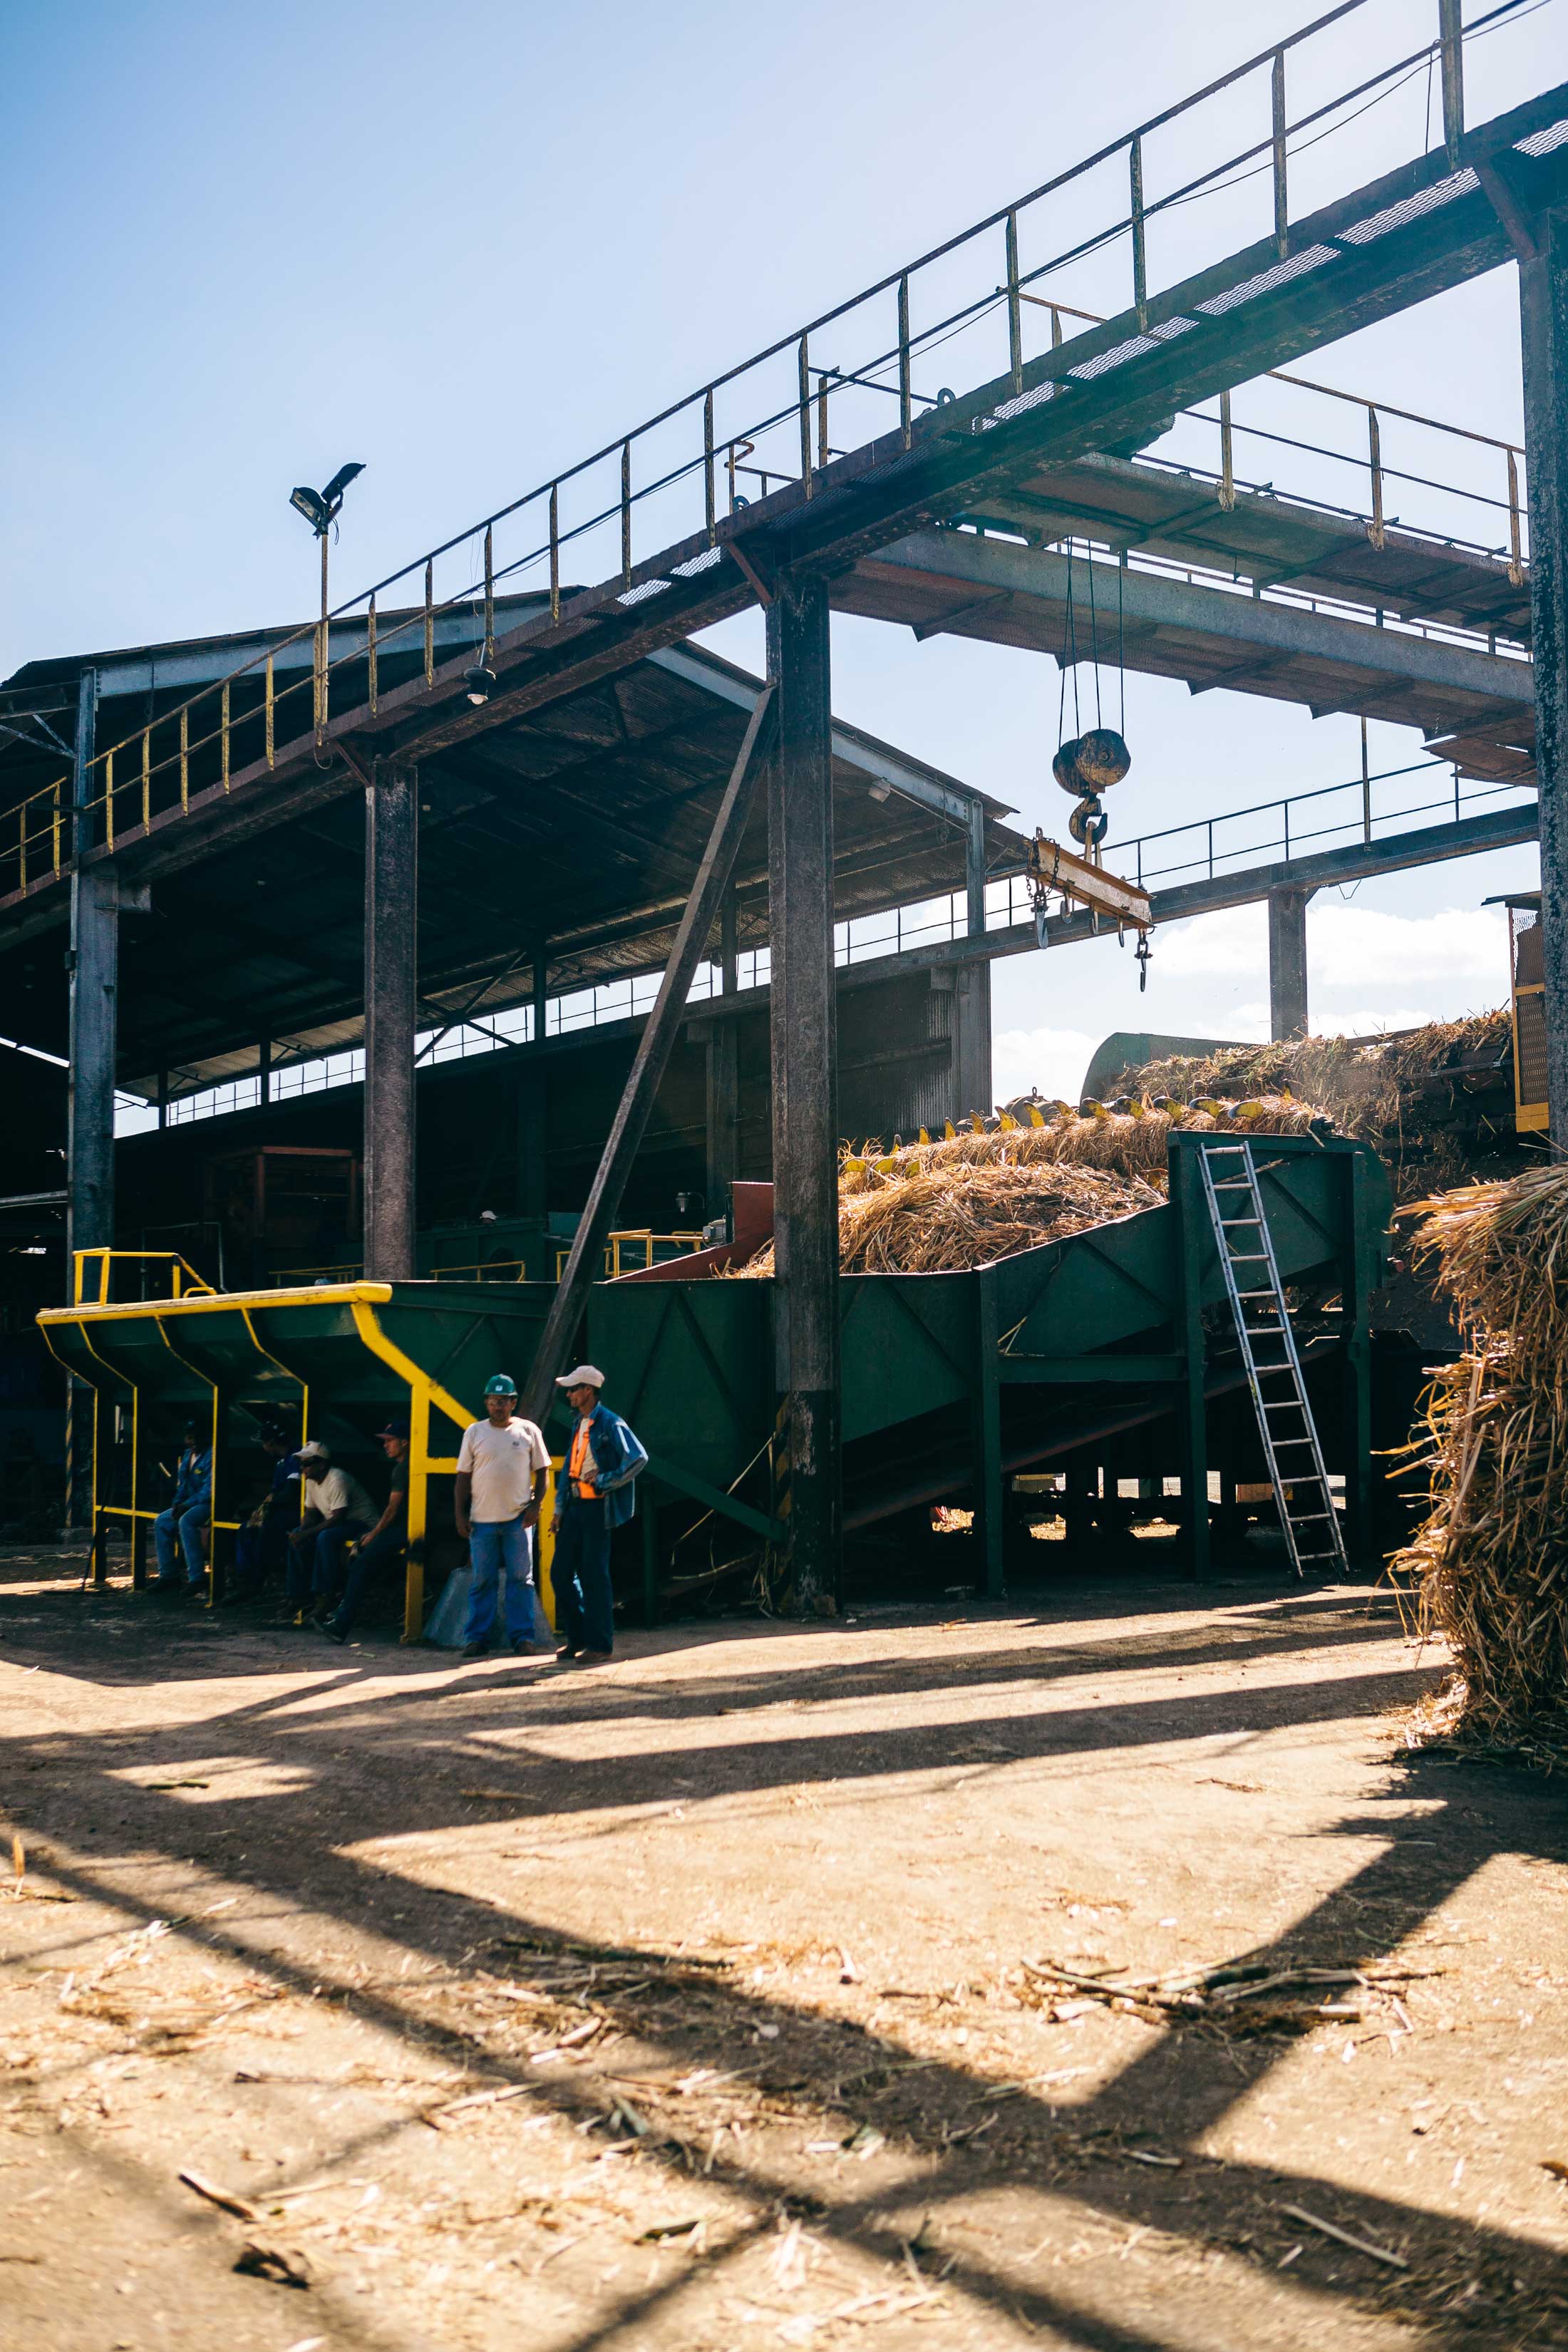 Cane processing in Panama